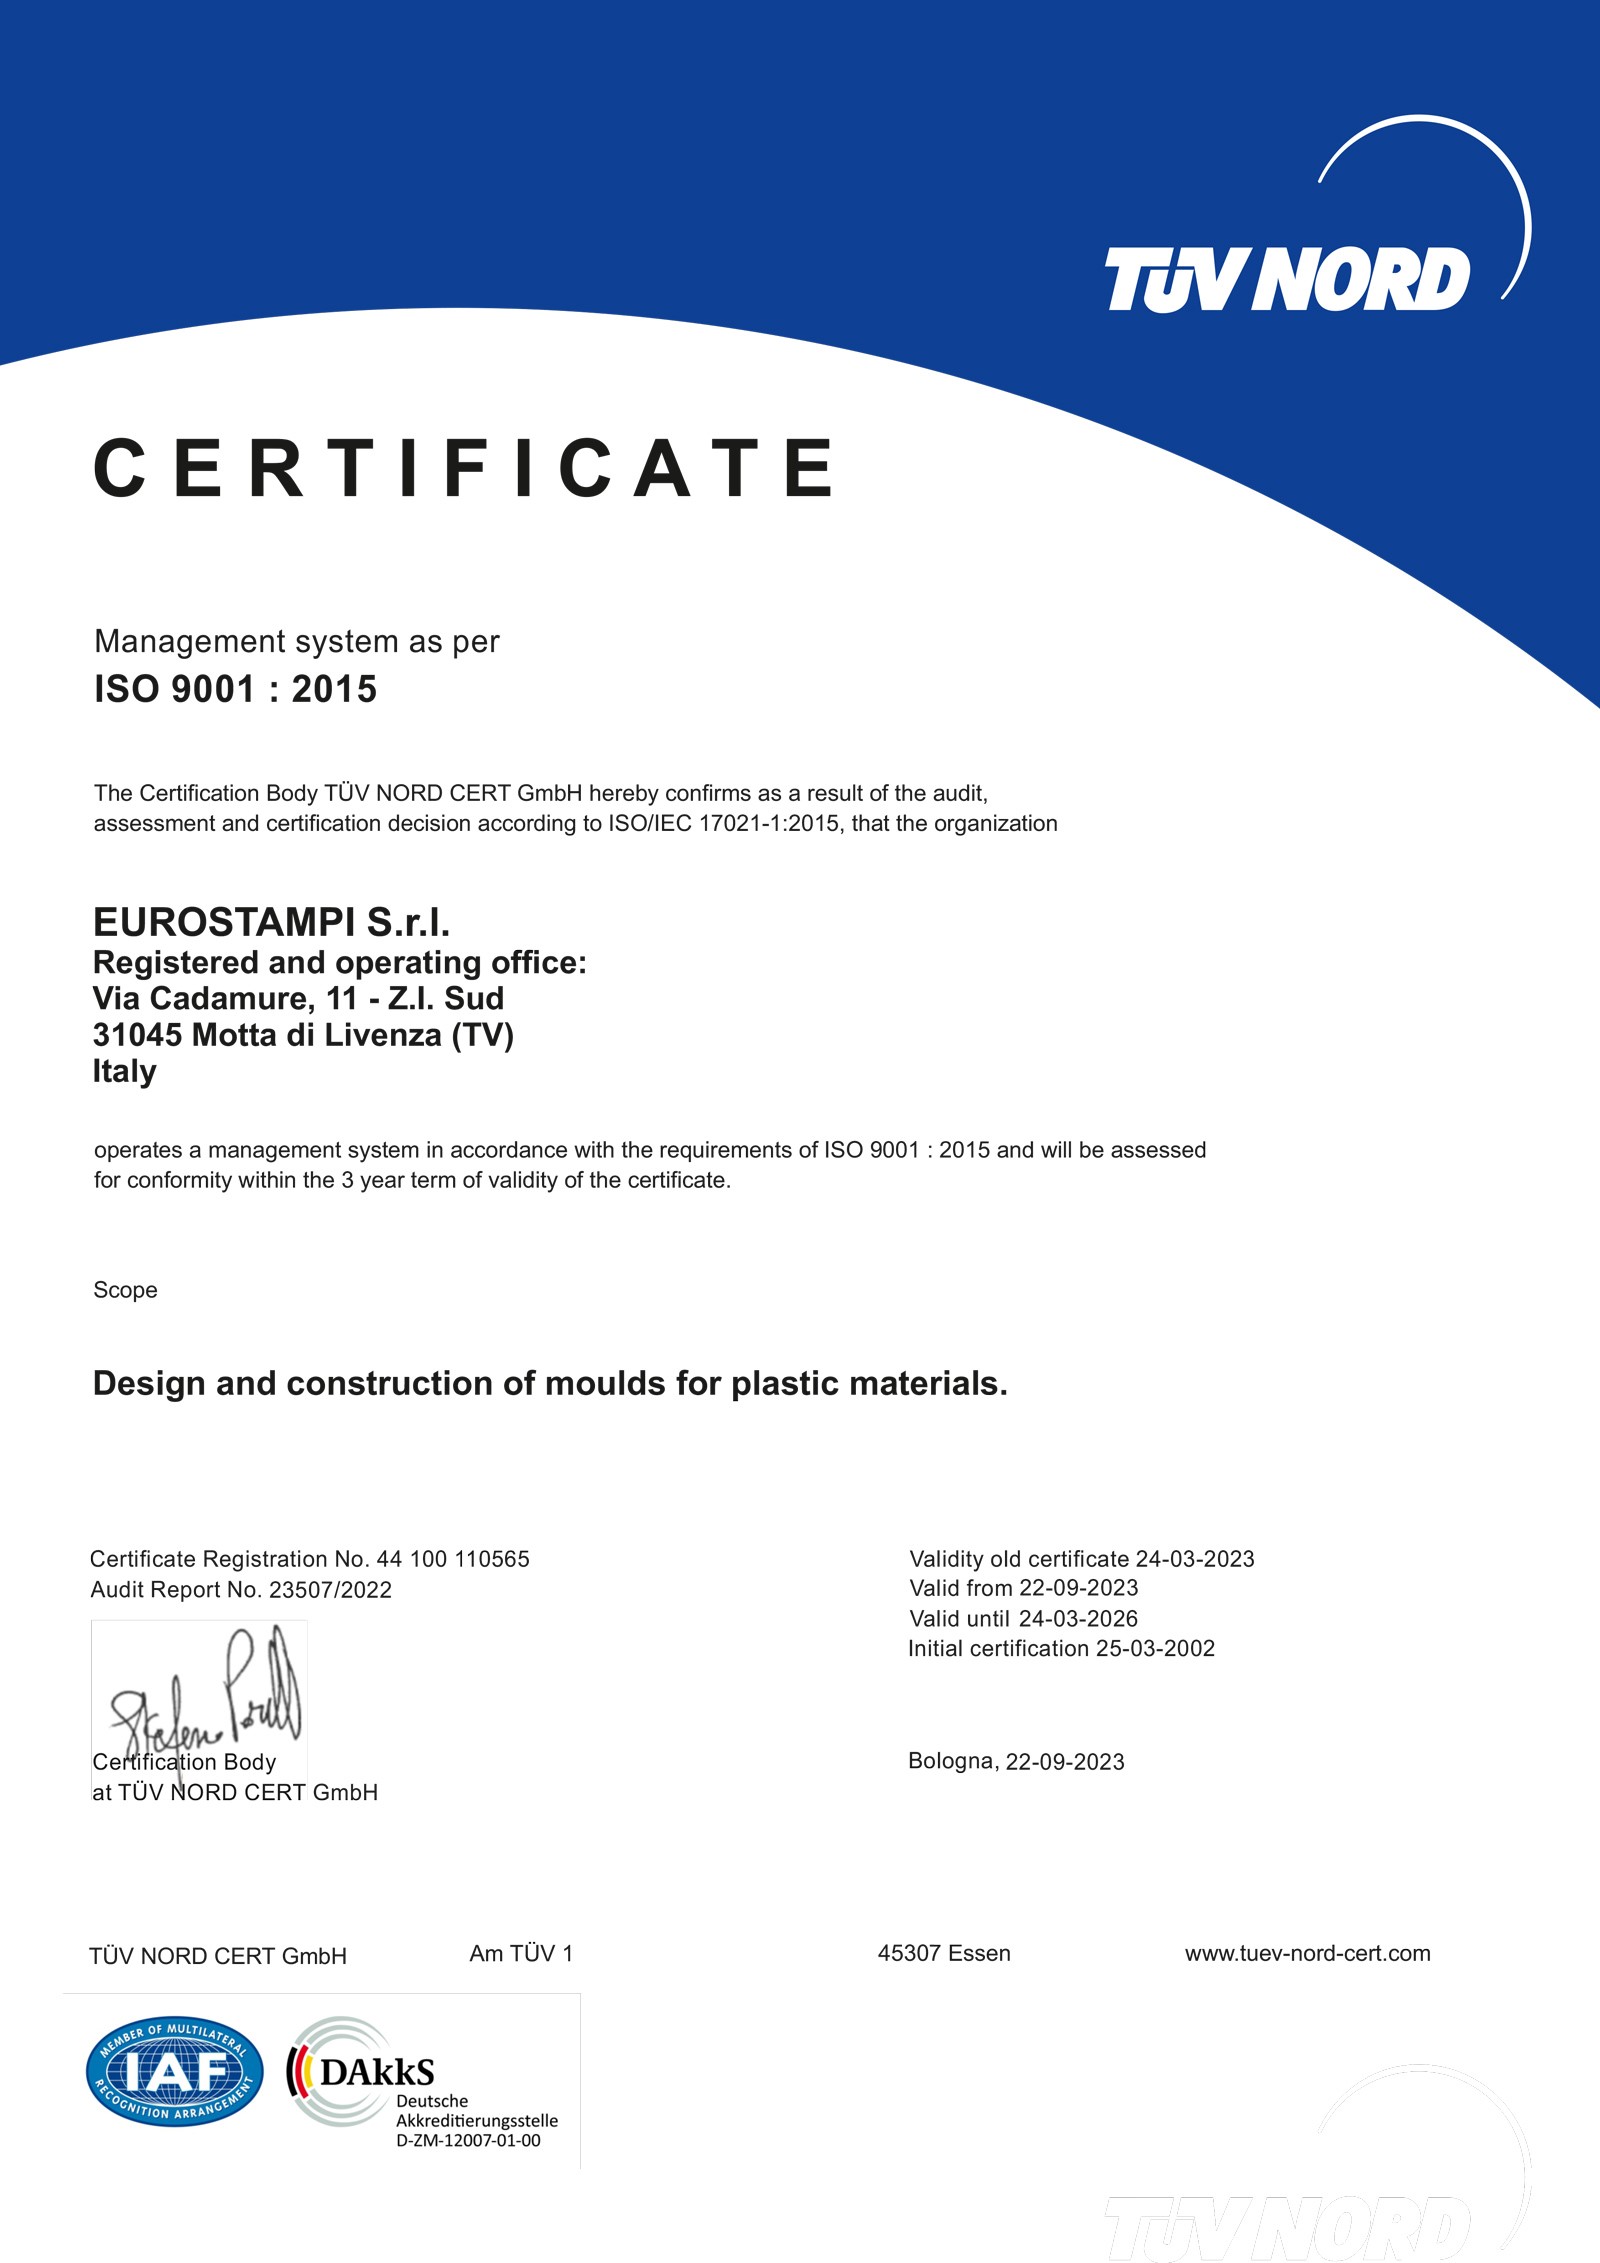 Eurostampi is certified for the UNI EN ISO 9001 quality system